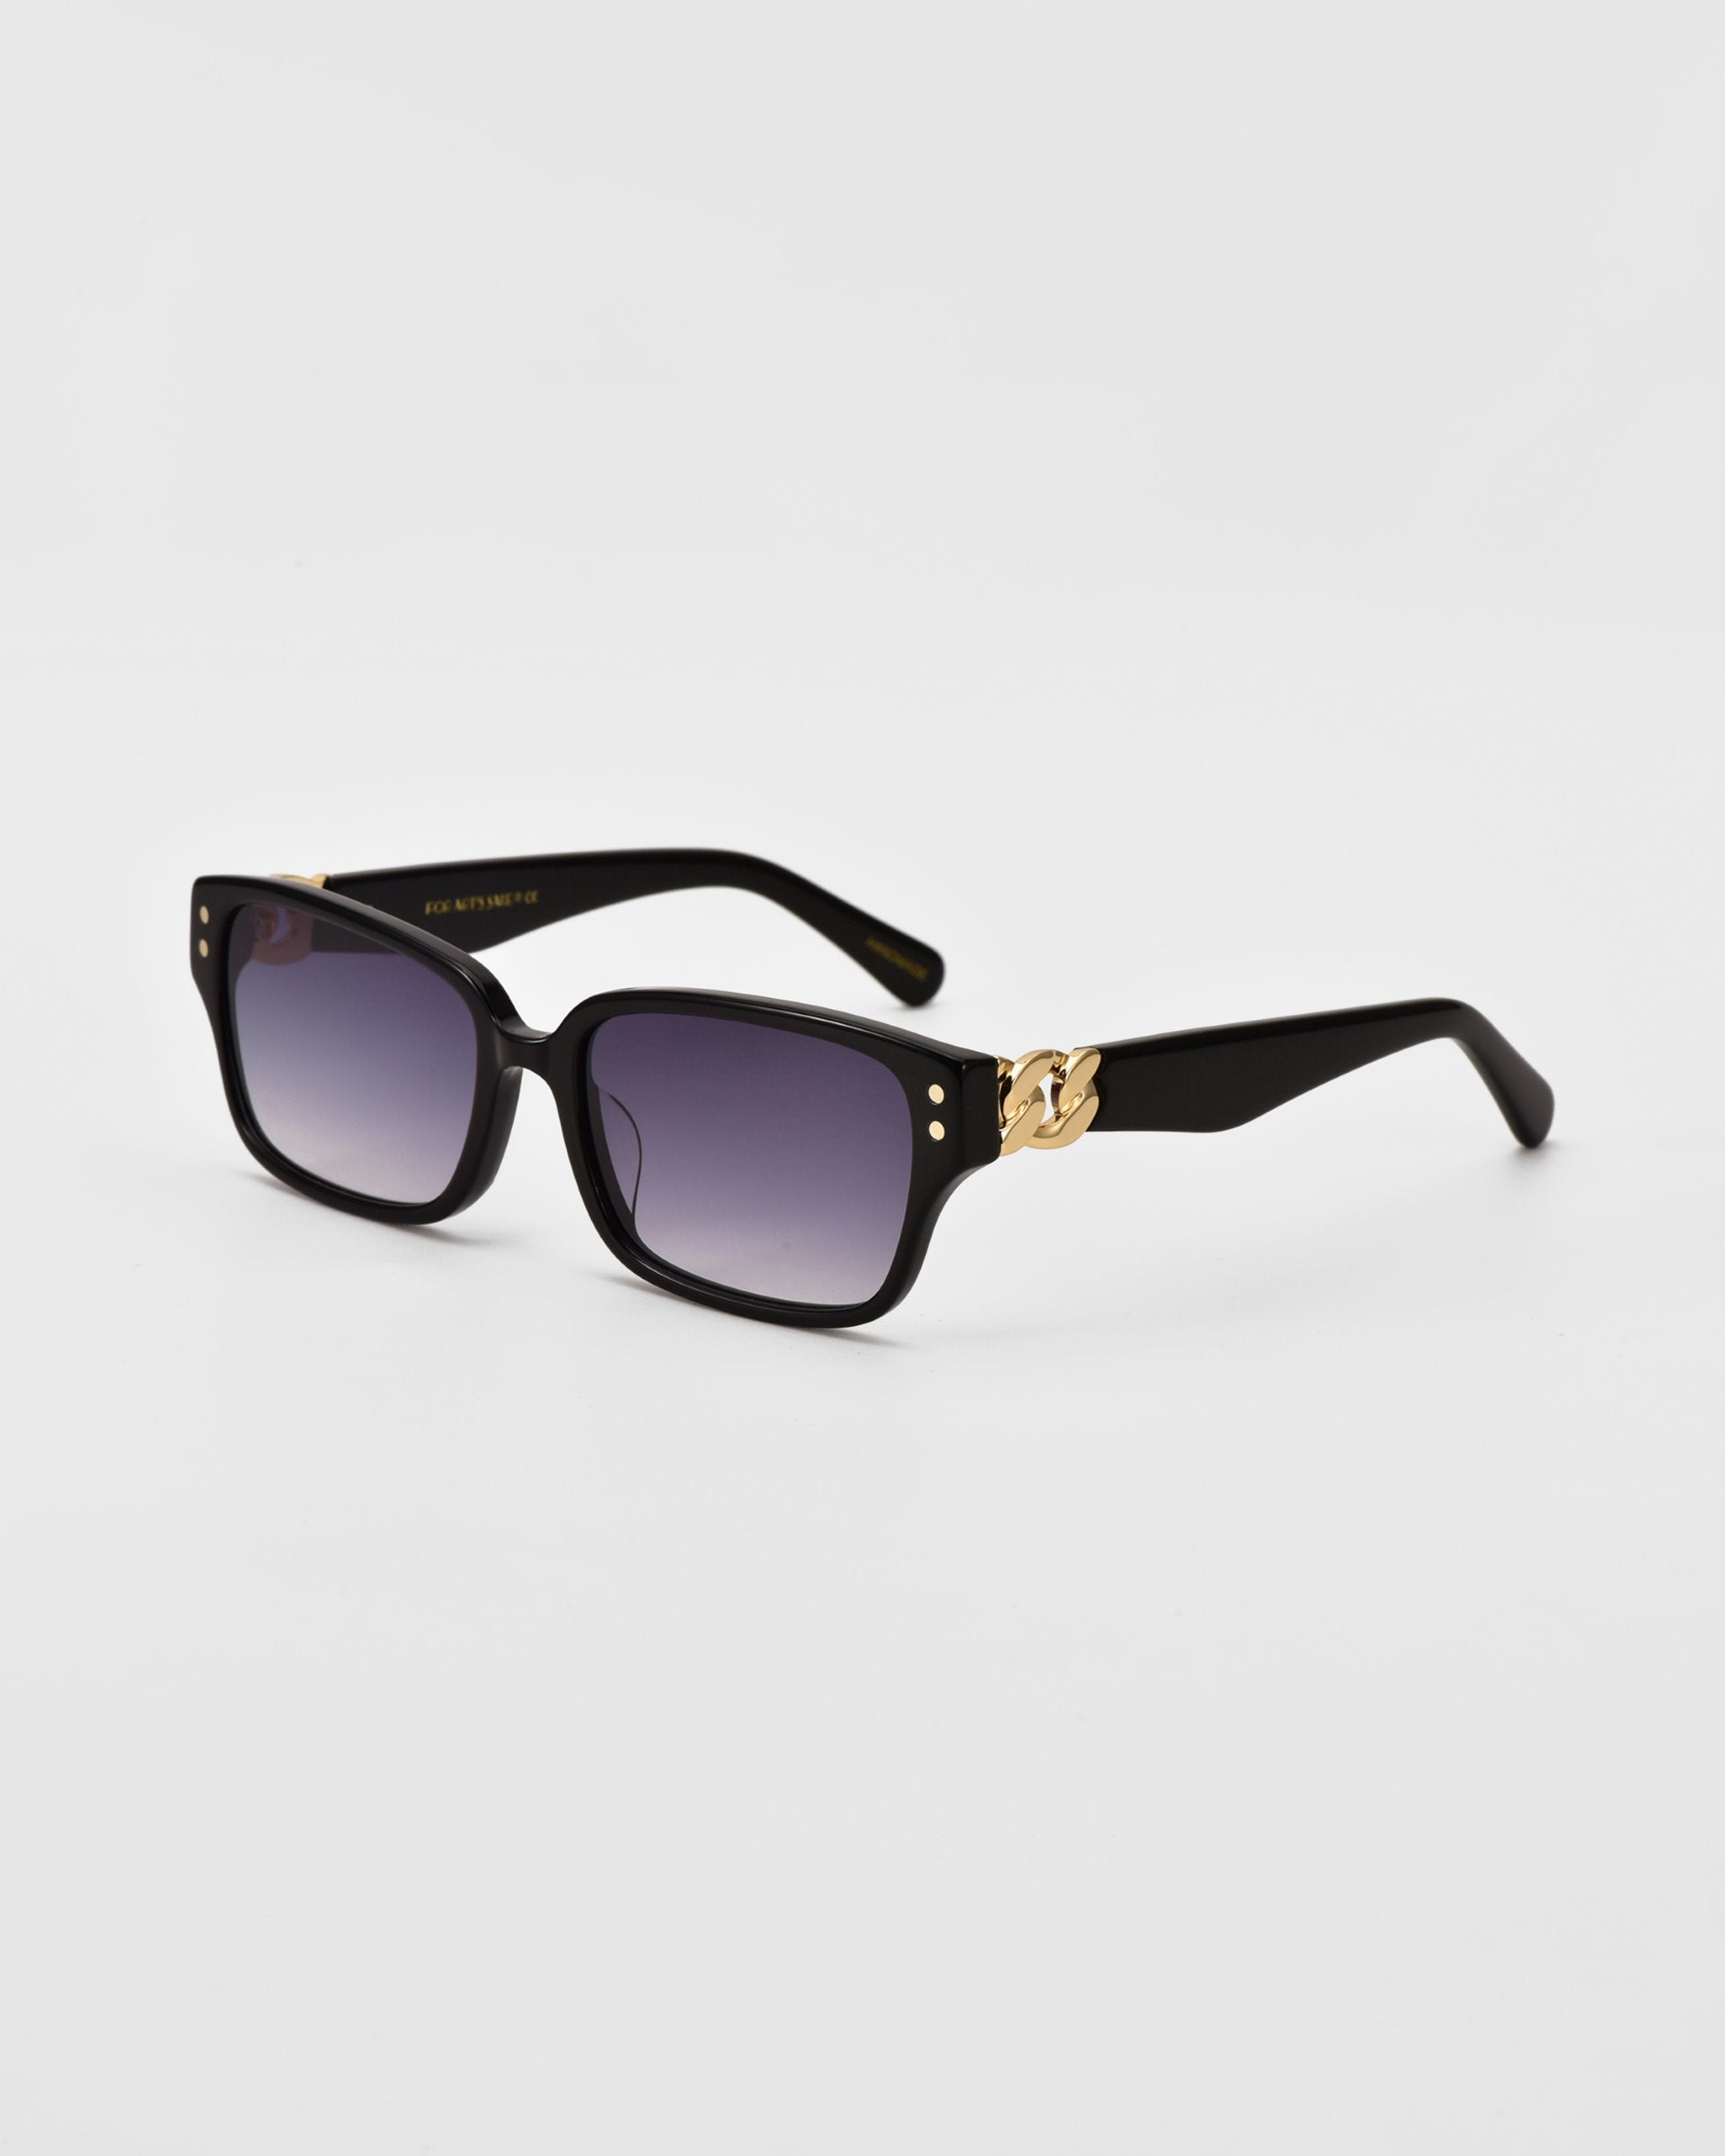 A pair of black rectangular For Art&#39;s Sake® Zenith sunglasses with dark tinted lenses is displayed against a plain white background. The handcrafted acetate sunglasses feature gold detailing on the temples near the hinges.